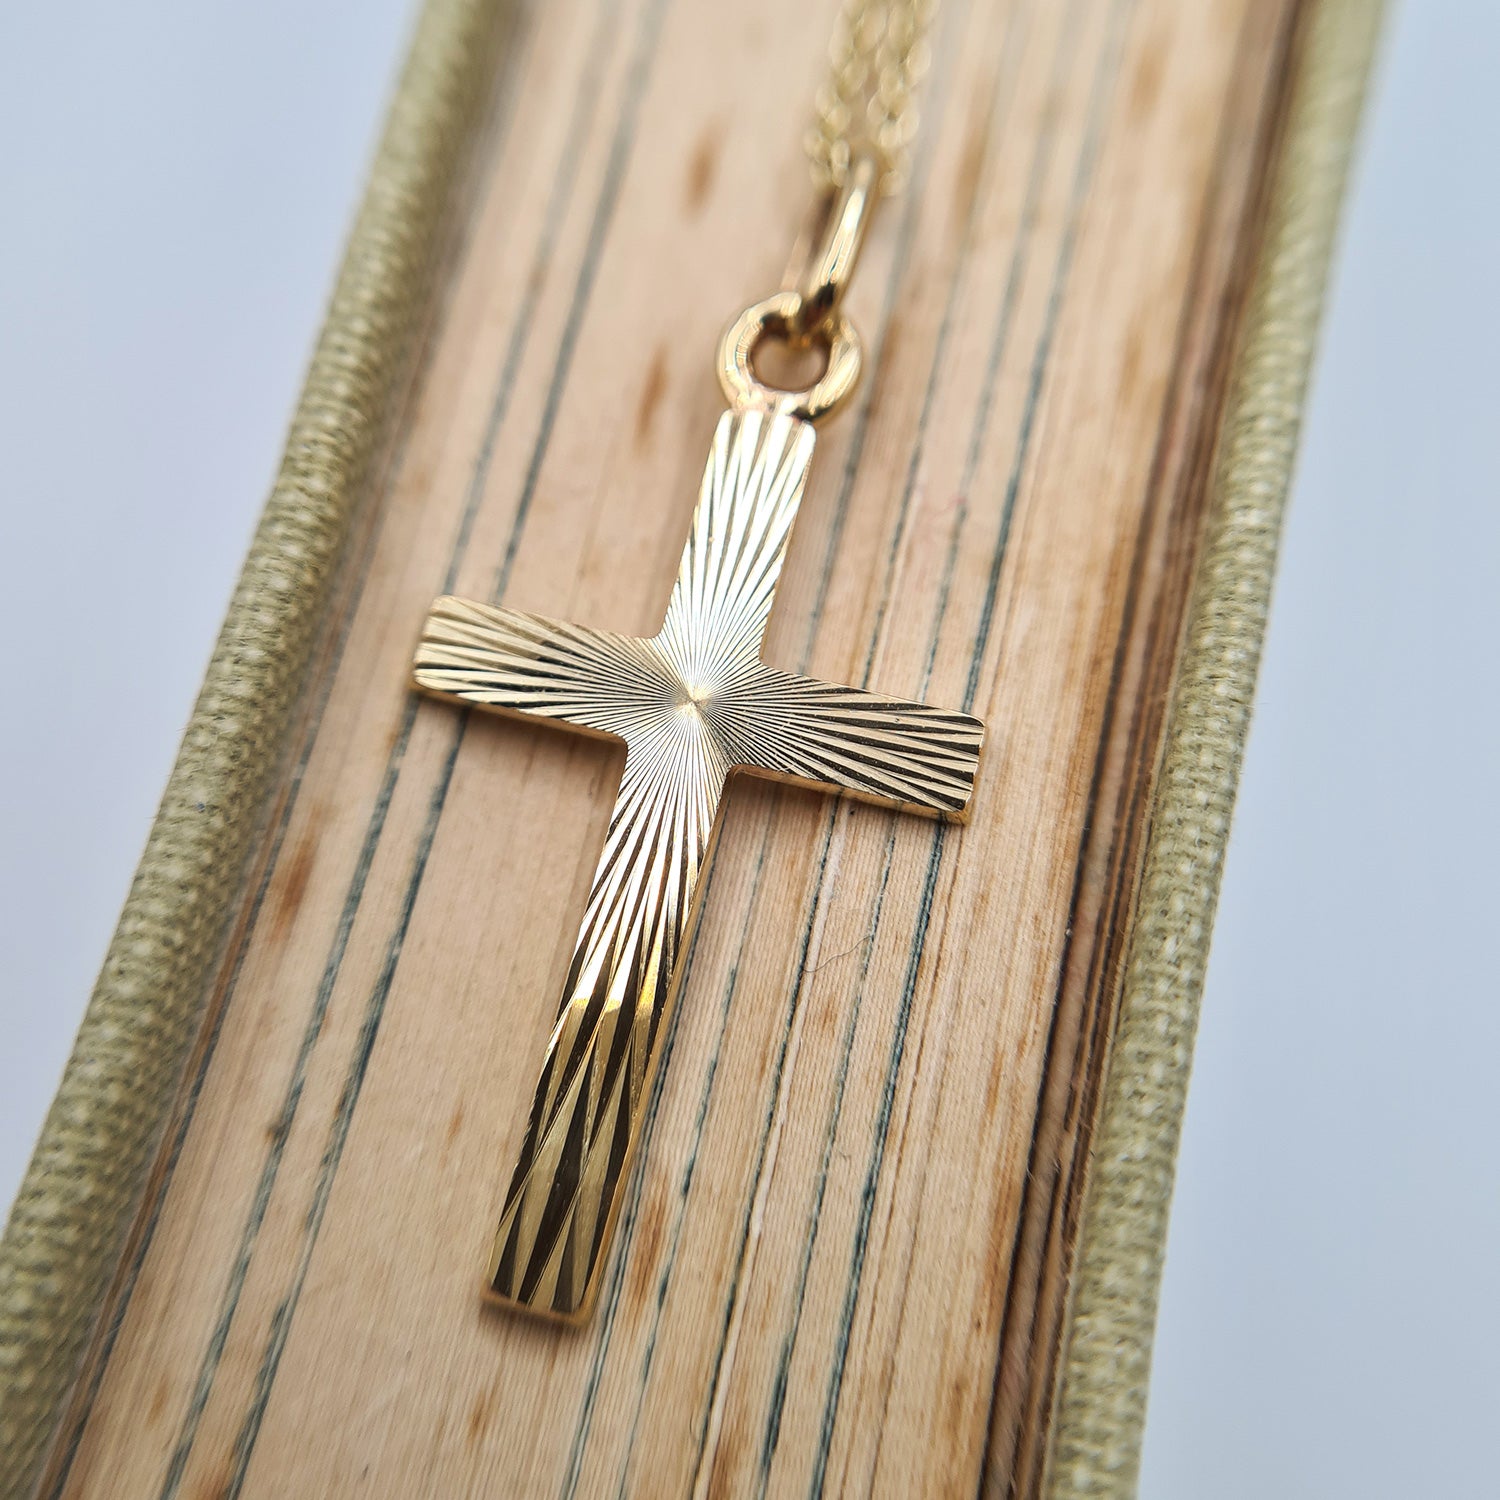 YL Men's Cross Necklace 316L Stainless Steel Large Jesus Christ Pendant  White/Gold/Black Jewelry Rolo Chain for 20'' 22'' 24'' 26'' 28'', Metal,  Cubic Zirconia : Amazon.co.uk: Fashion